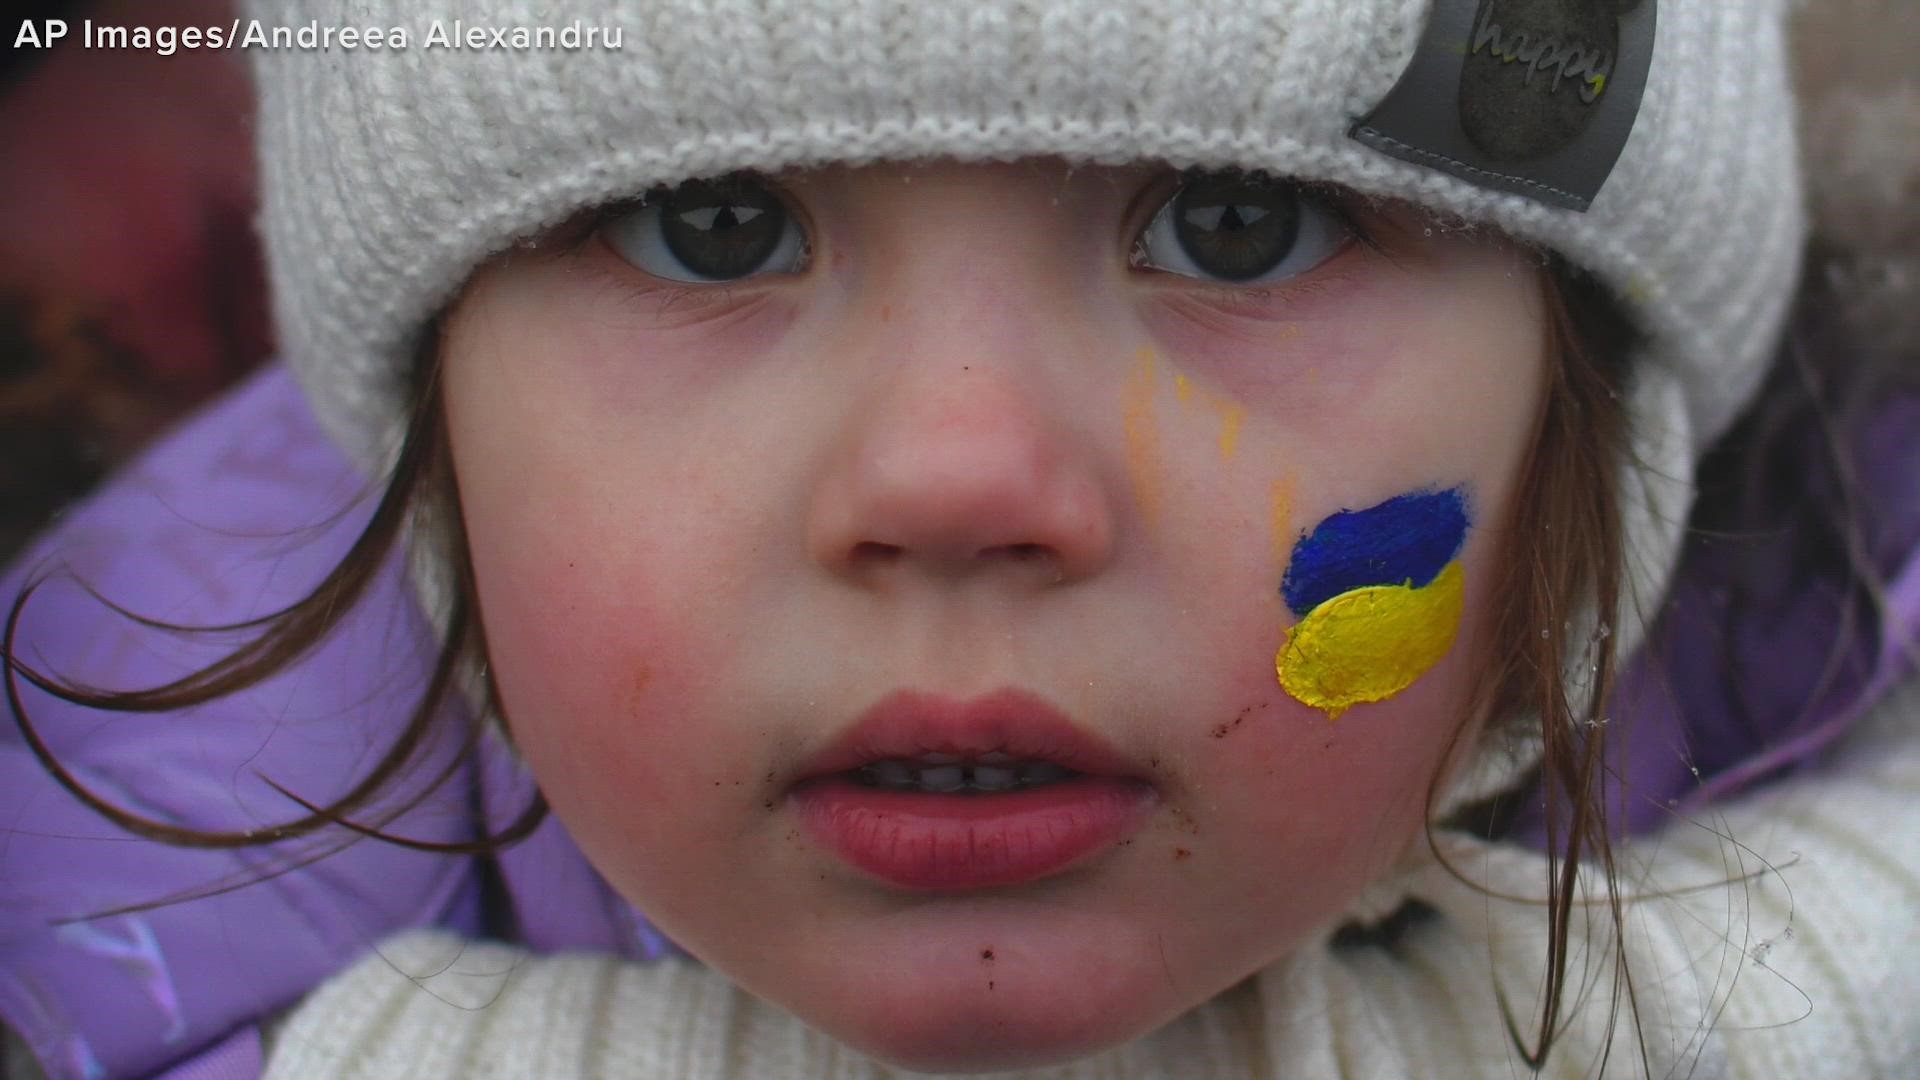 Images of those affected by Russia's invasion of Ukraine.